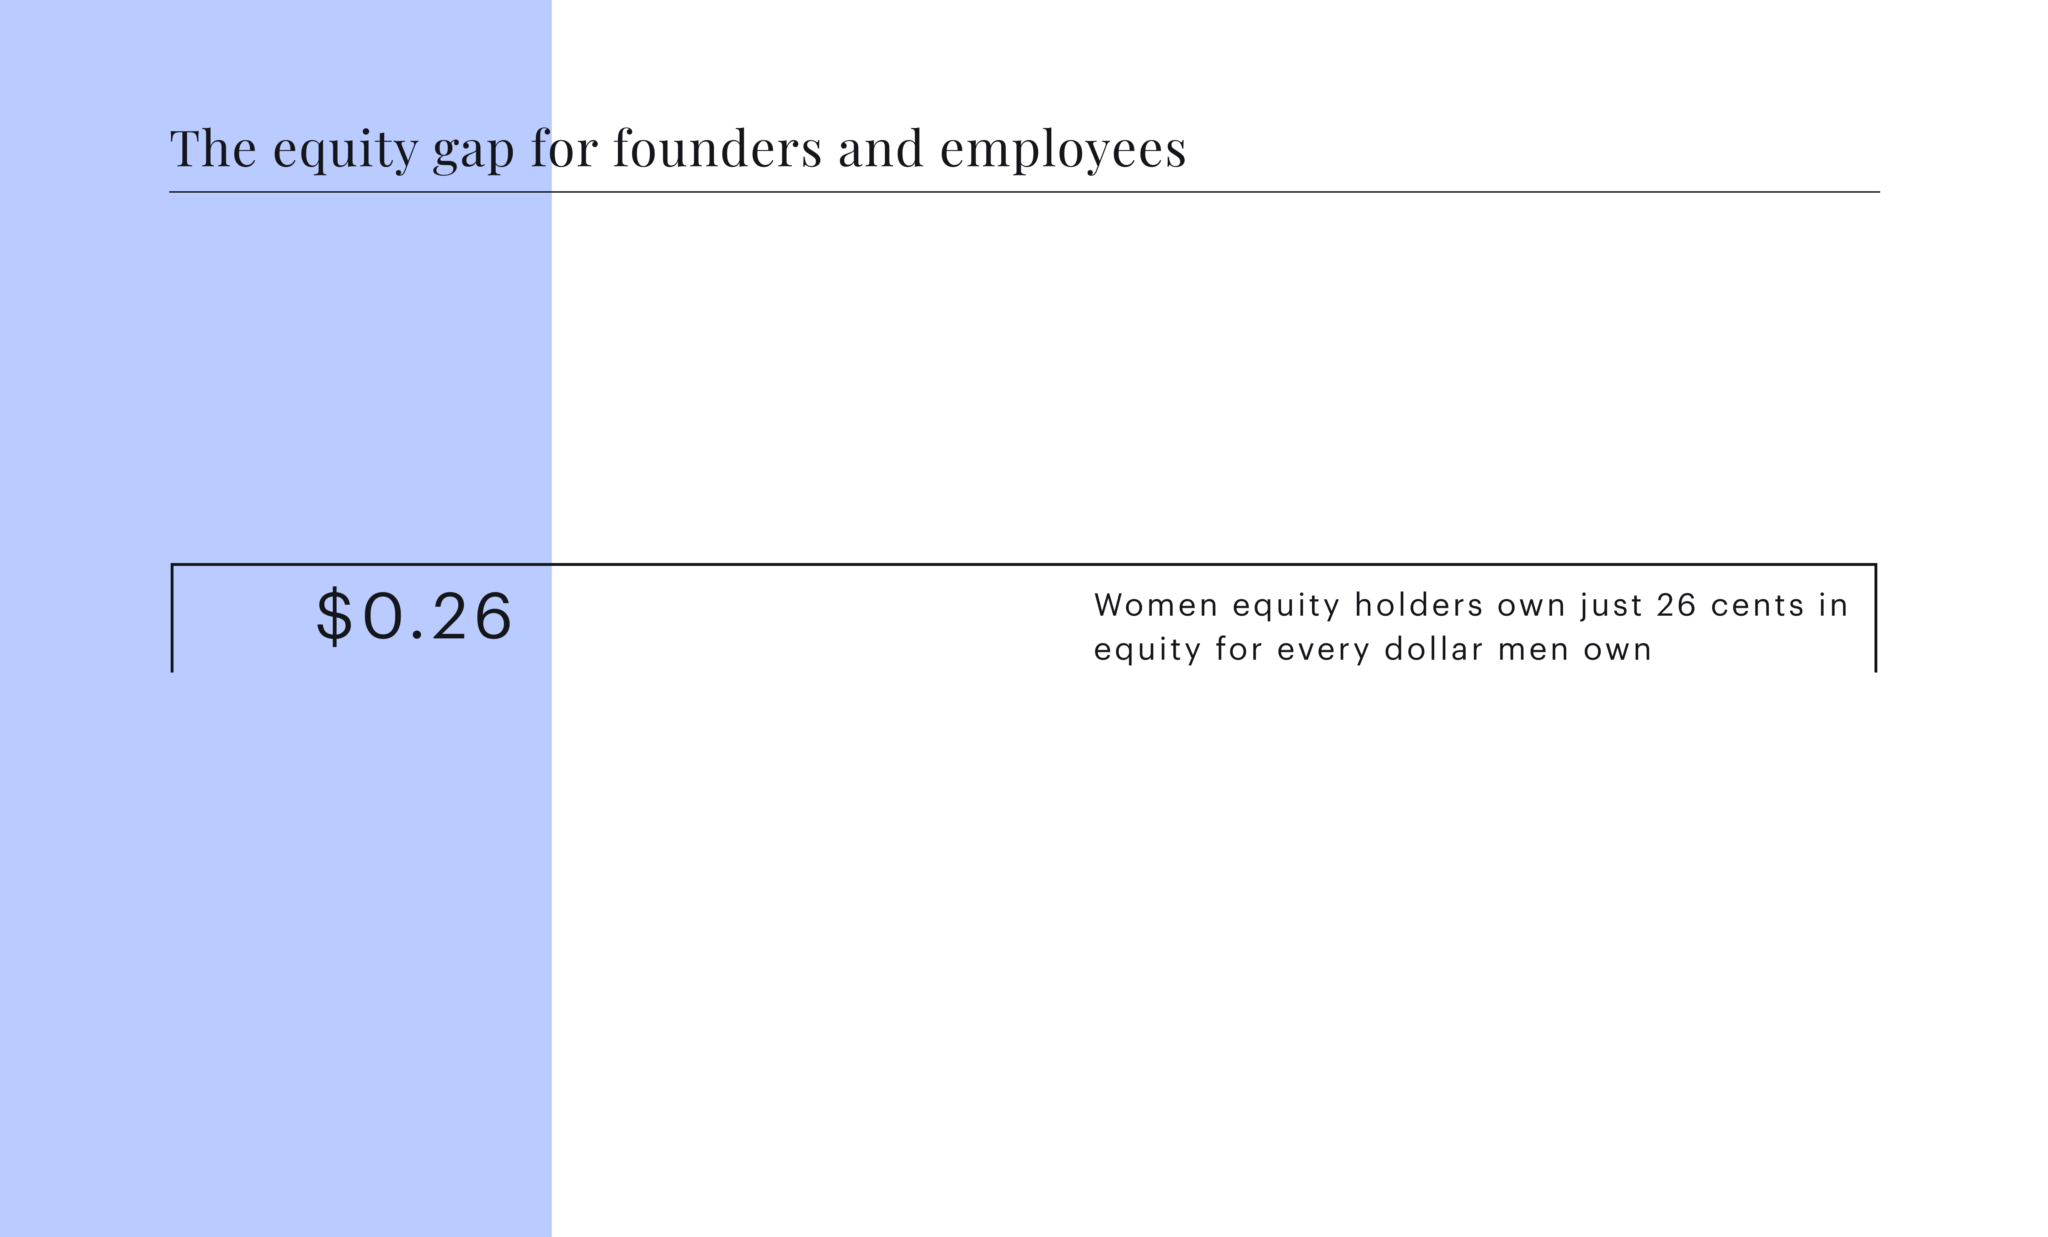 The-equity-gap-for-employees-founders-2048x1237-1